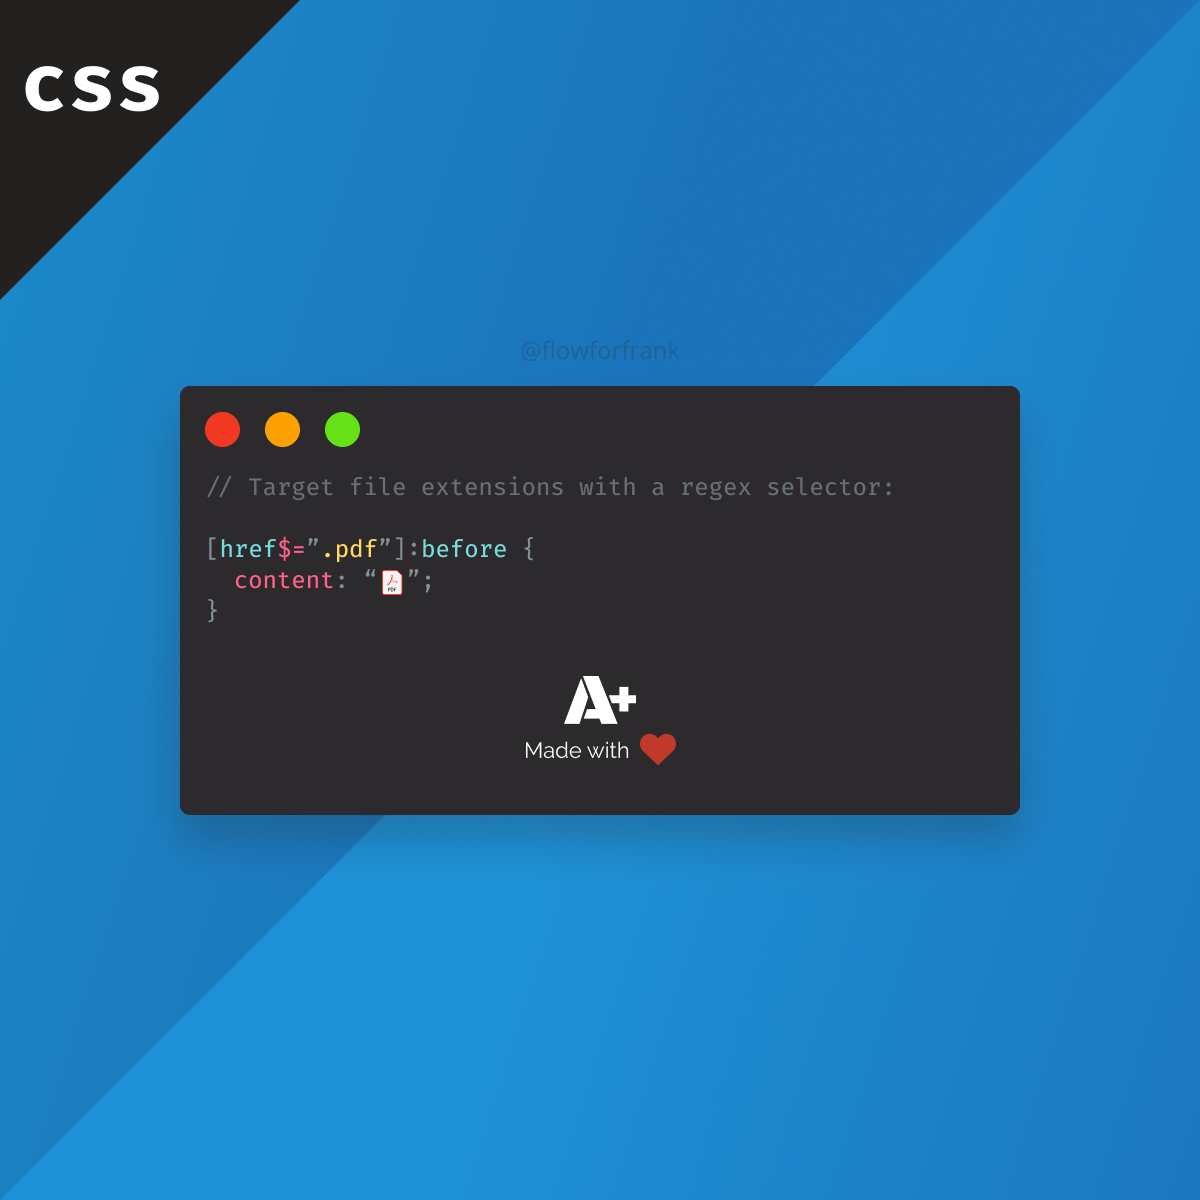 How to Target File Extensions in CSS